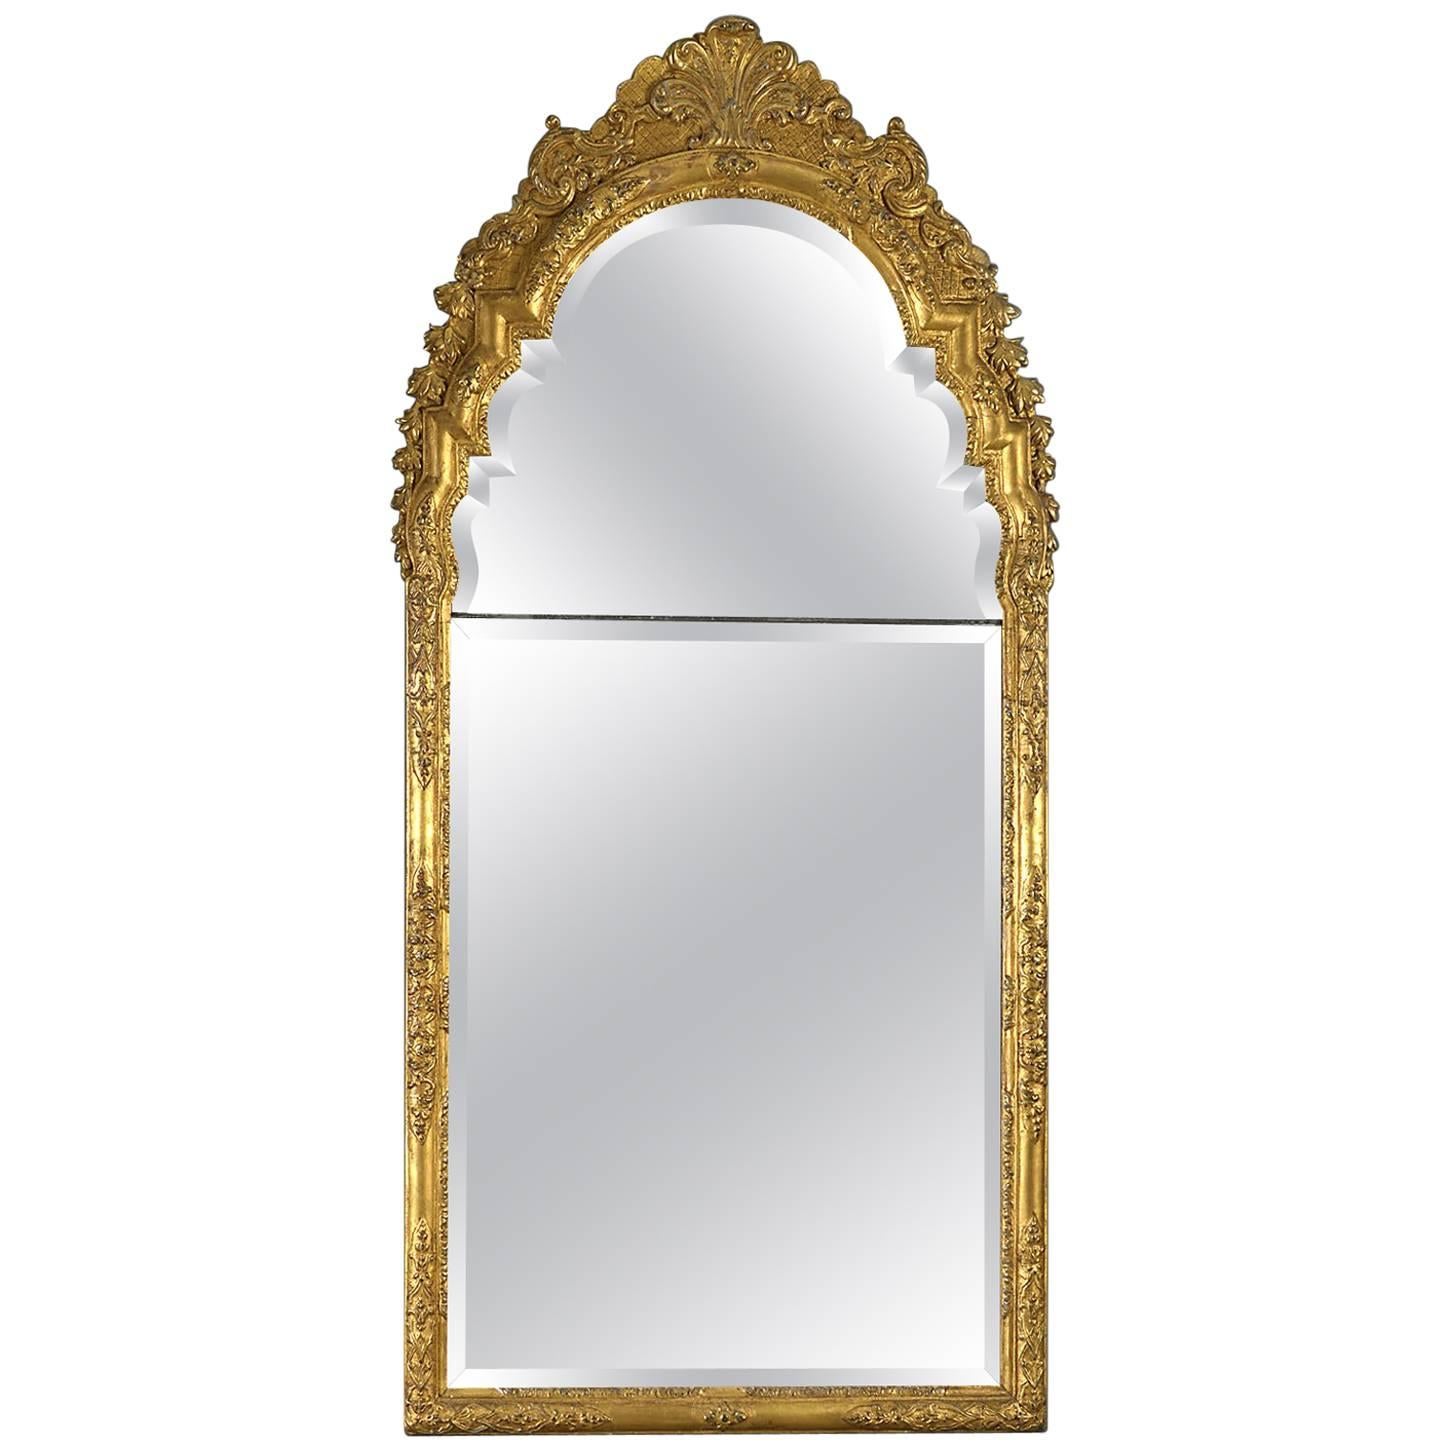 Early 18th Century Baroque Giltwood Mirror For Sale